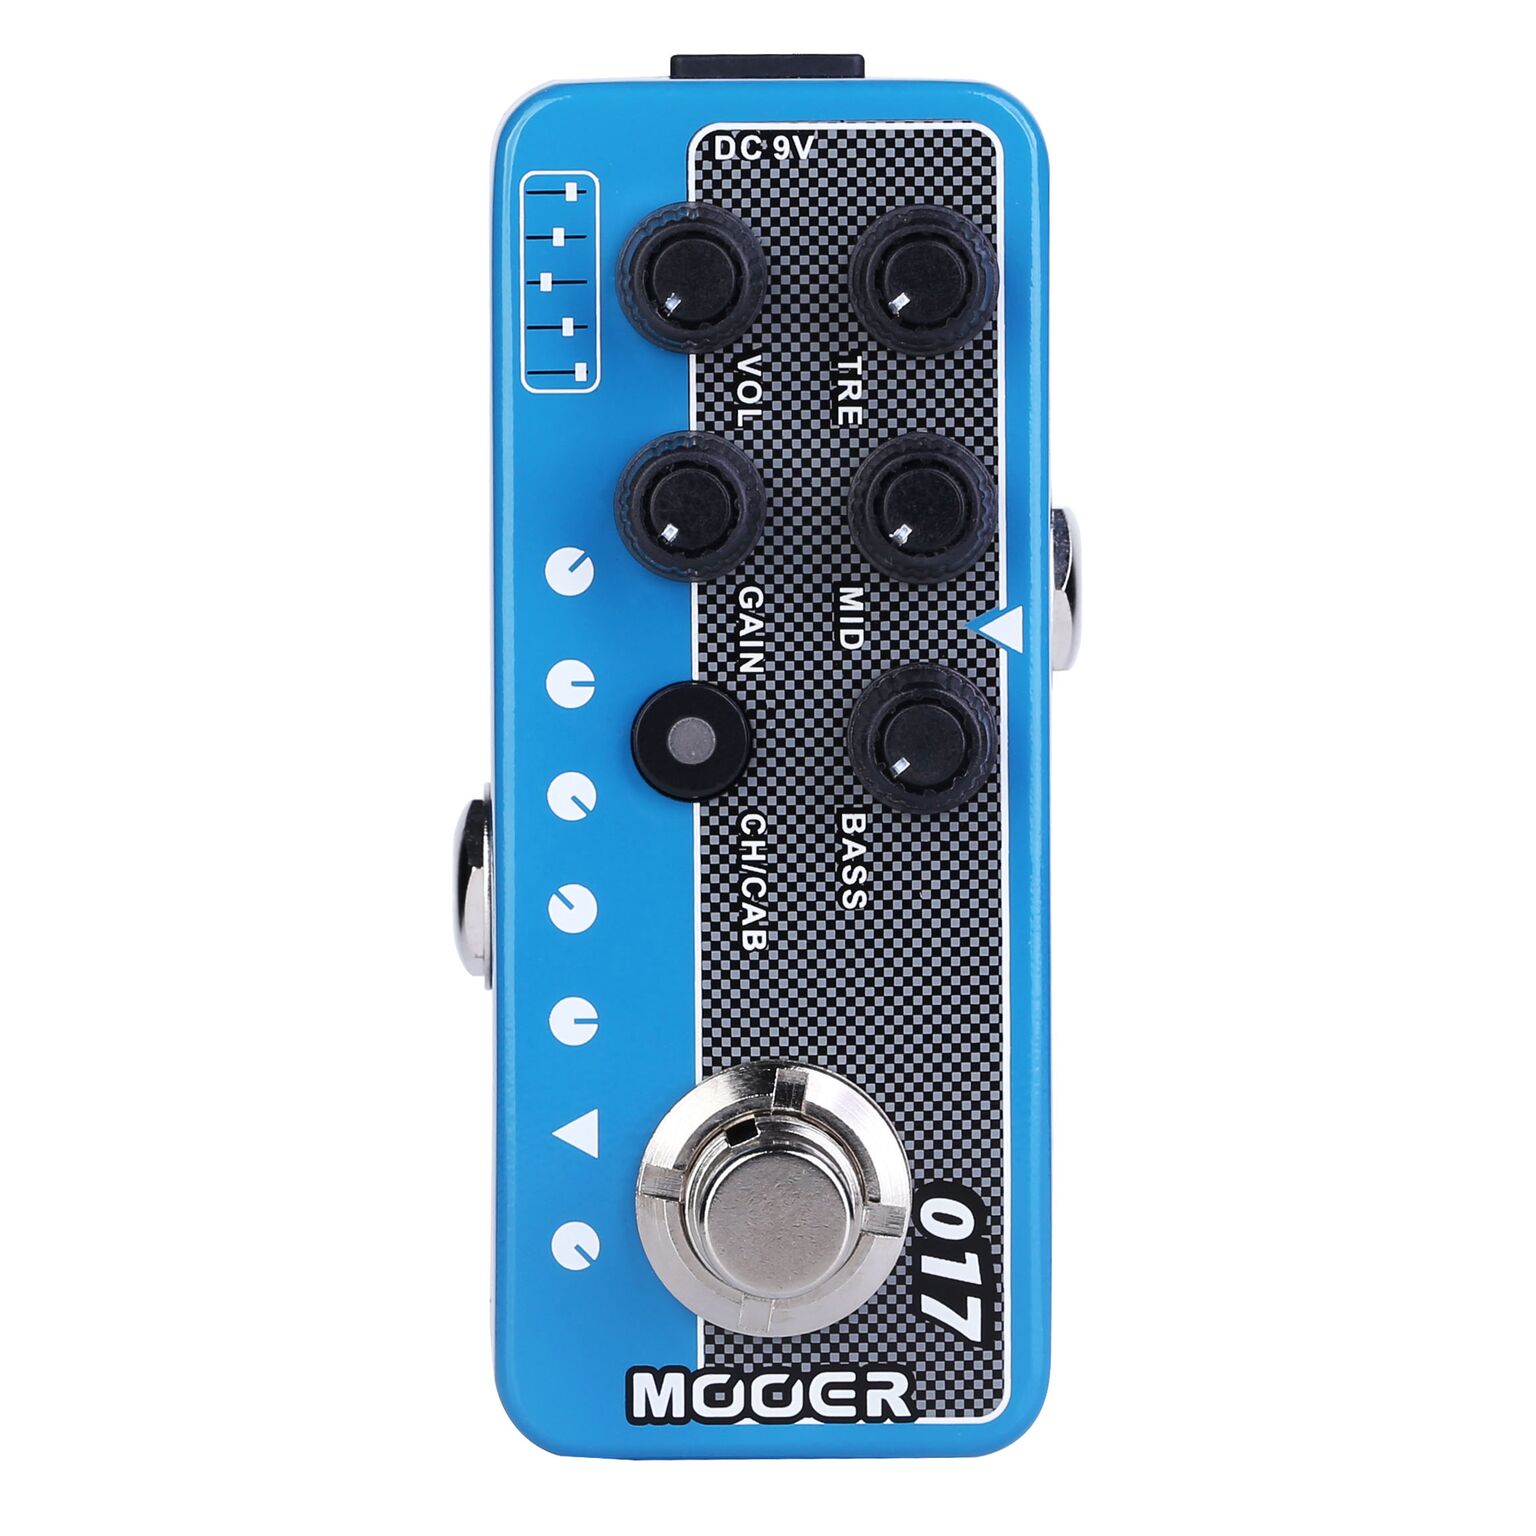 Mooer releases 3 more Micro Preamp pedals